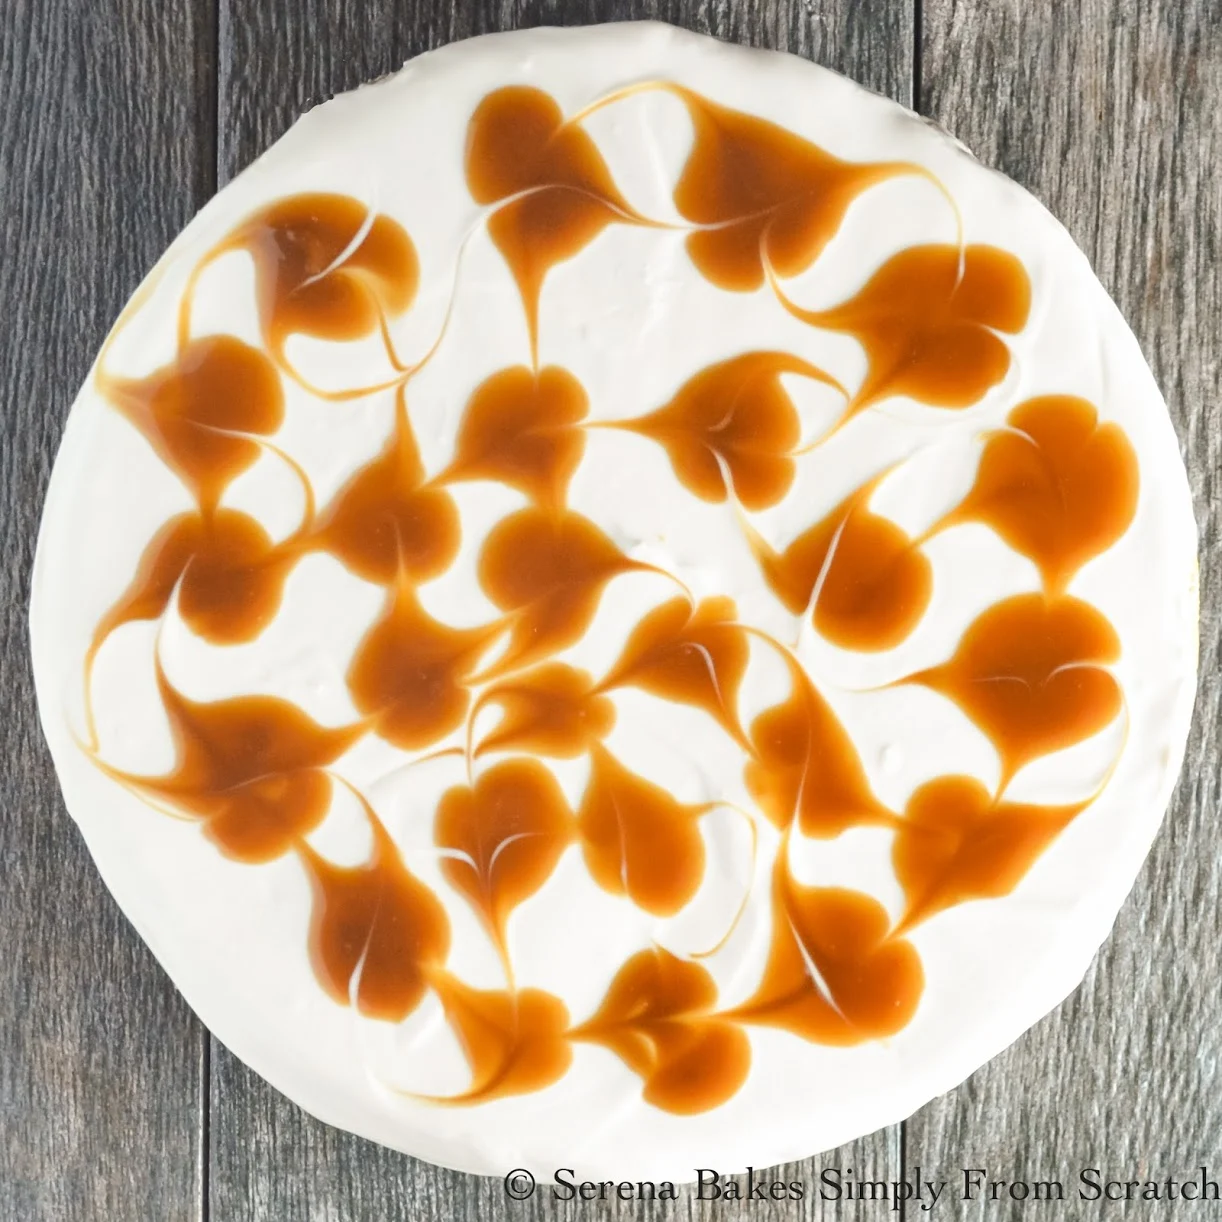 Pumpkin Cheesecake with Butterscotch Swirl recipe is a perfect alternative to pumpkin pie for Thanksgiving from Serena Bakes Simply From Scratch.